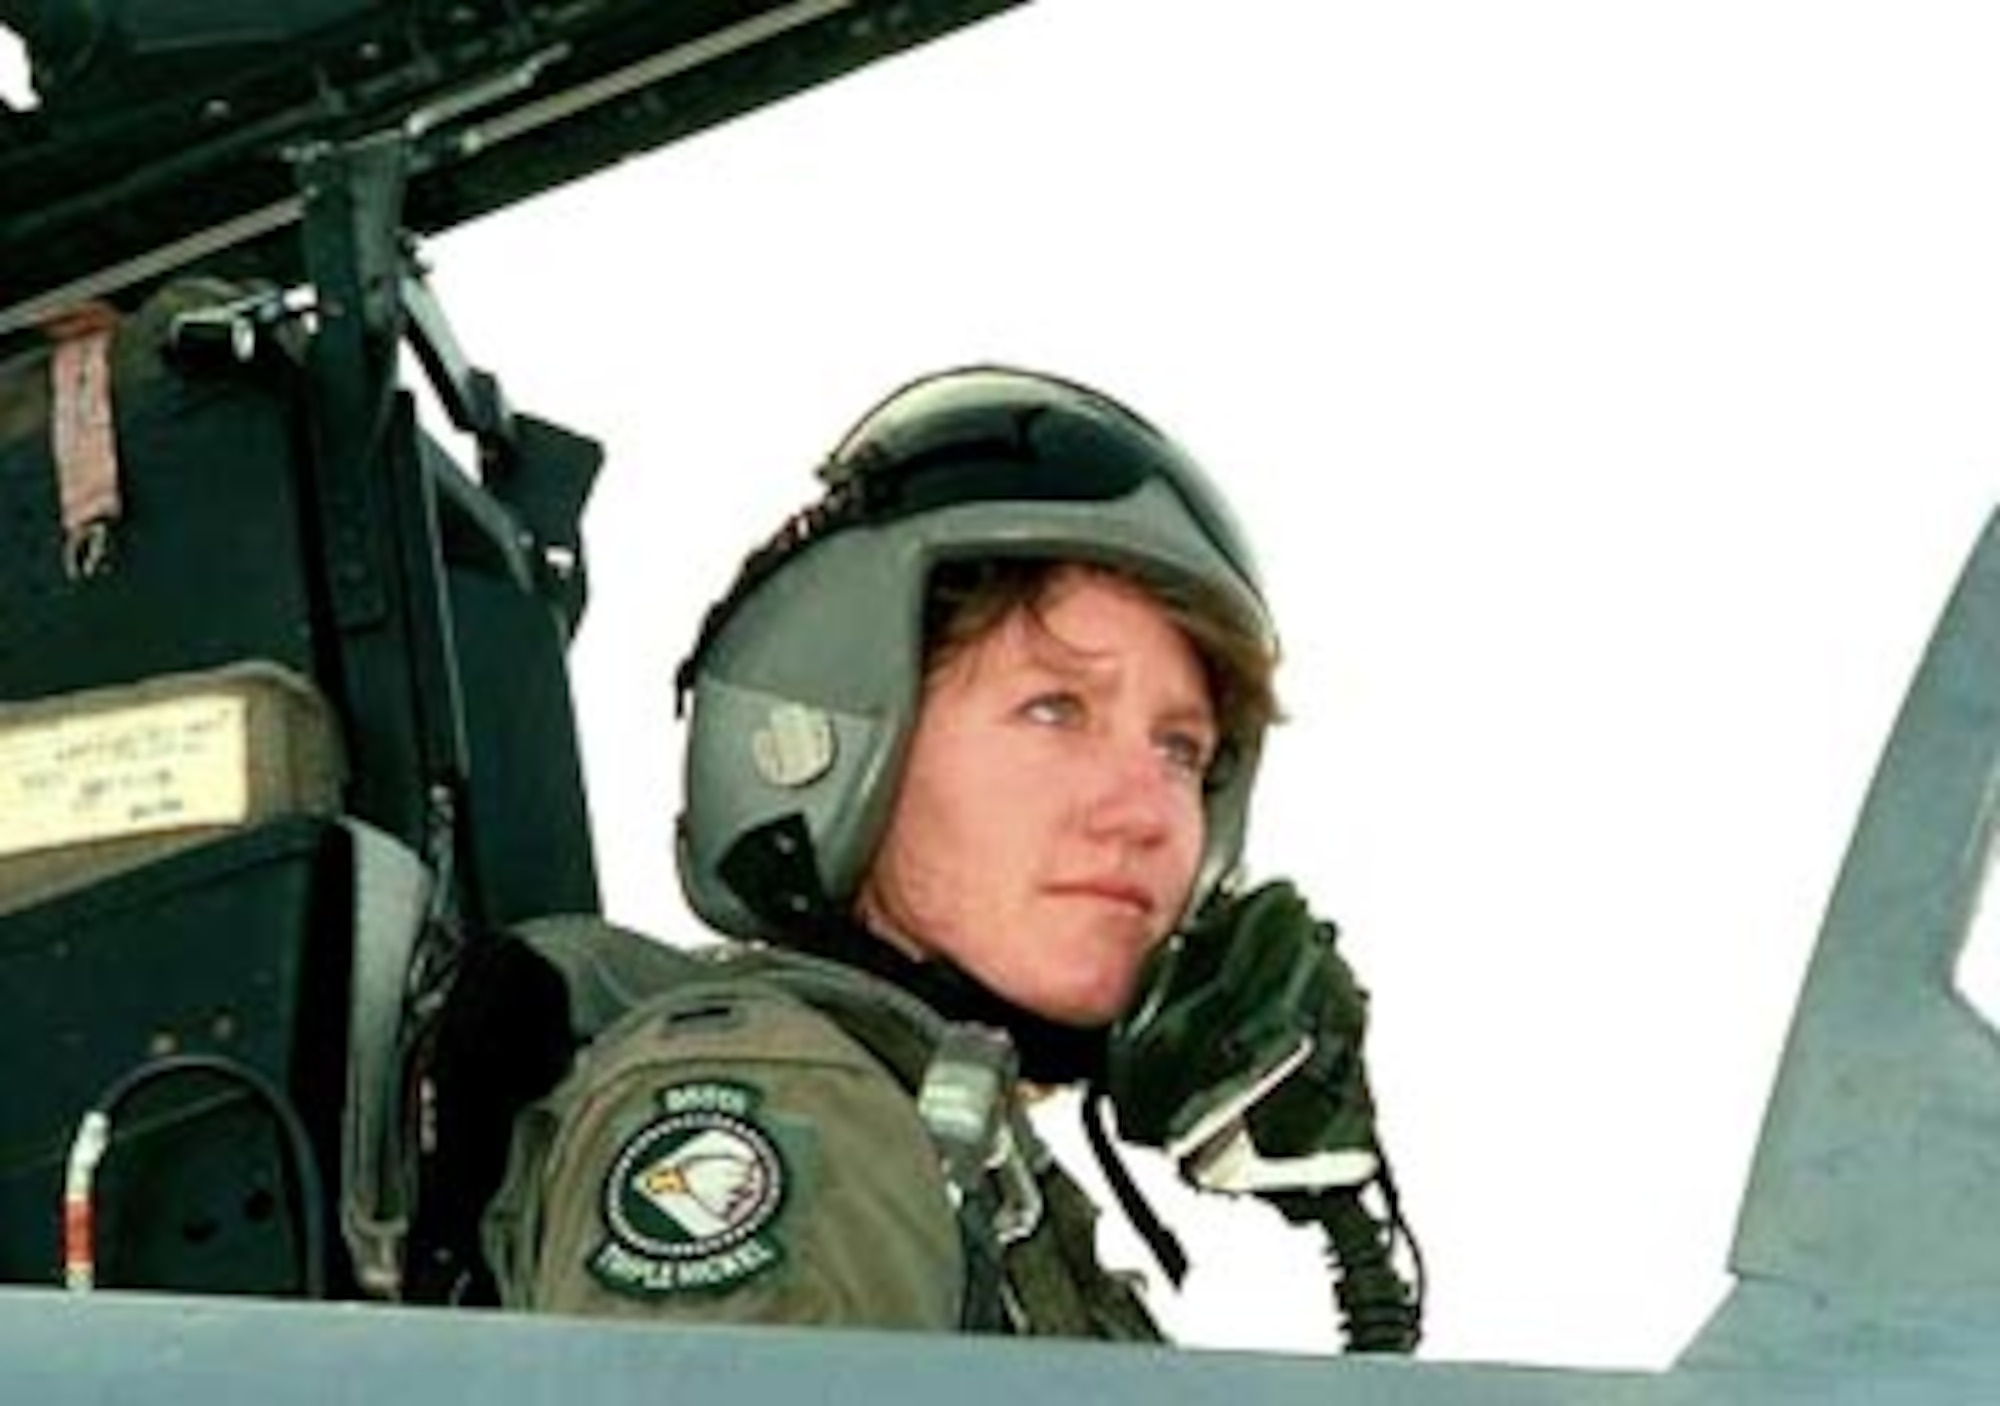 1st Lt. Jeannie Flynn in the cockpit of an F-15E during tactical training at Luke Air Force Base, Ariz. (U.S. Air Force photo/Staff Sgt. Brad Fallen)